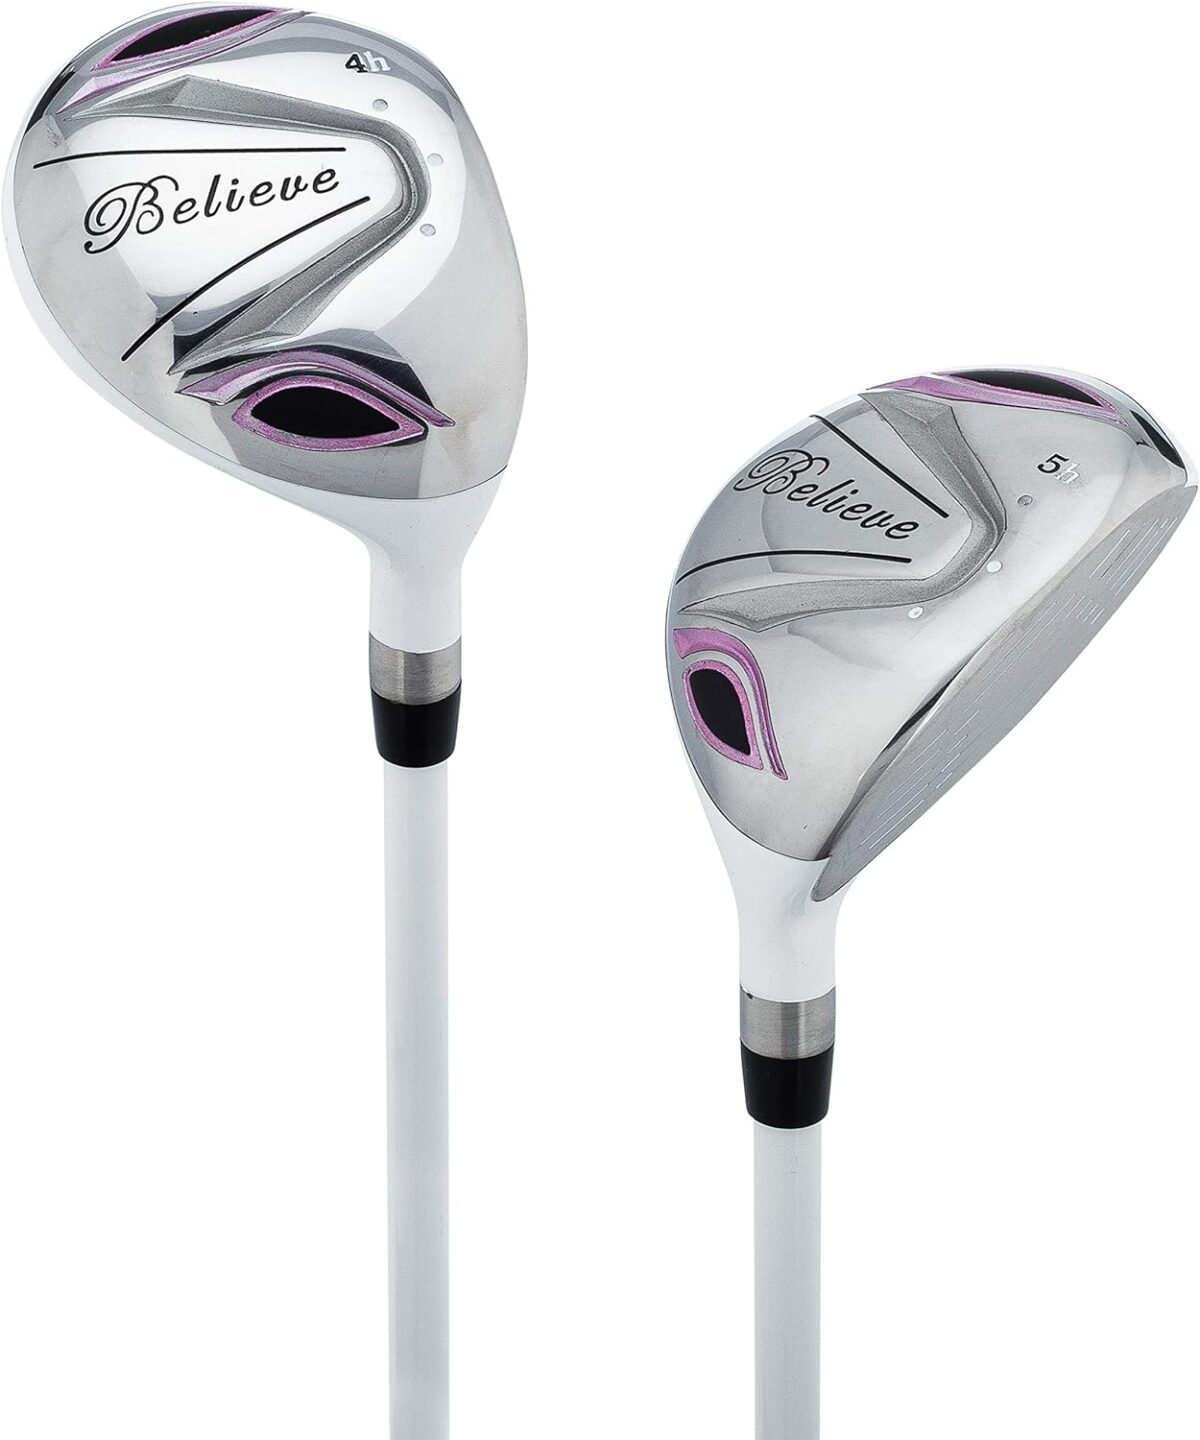 Comparing Women’s Golf Sets: Reviews & Analysis